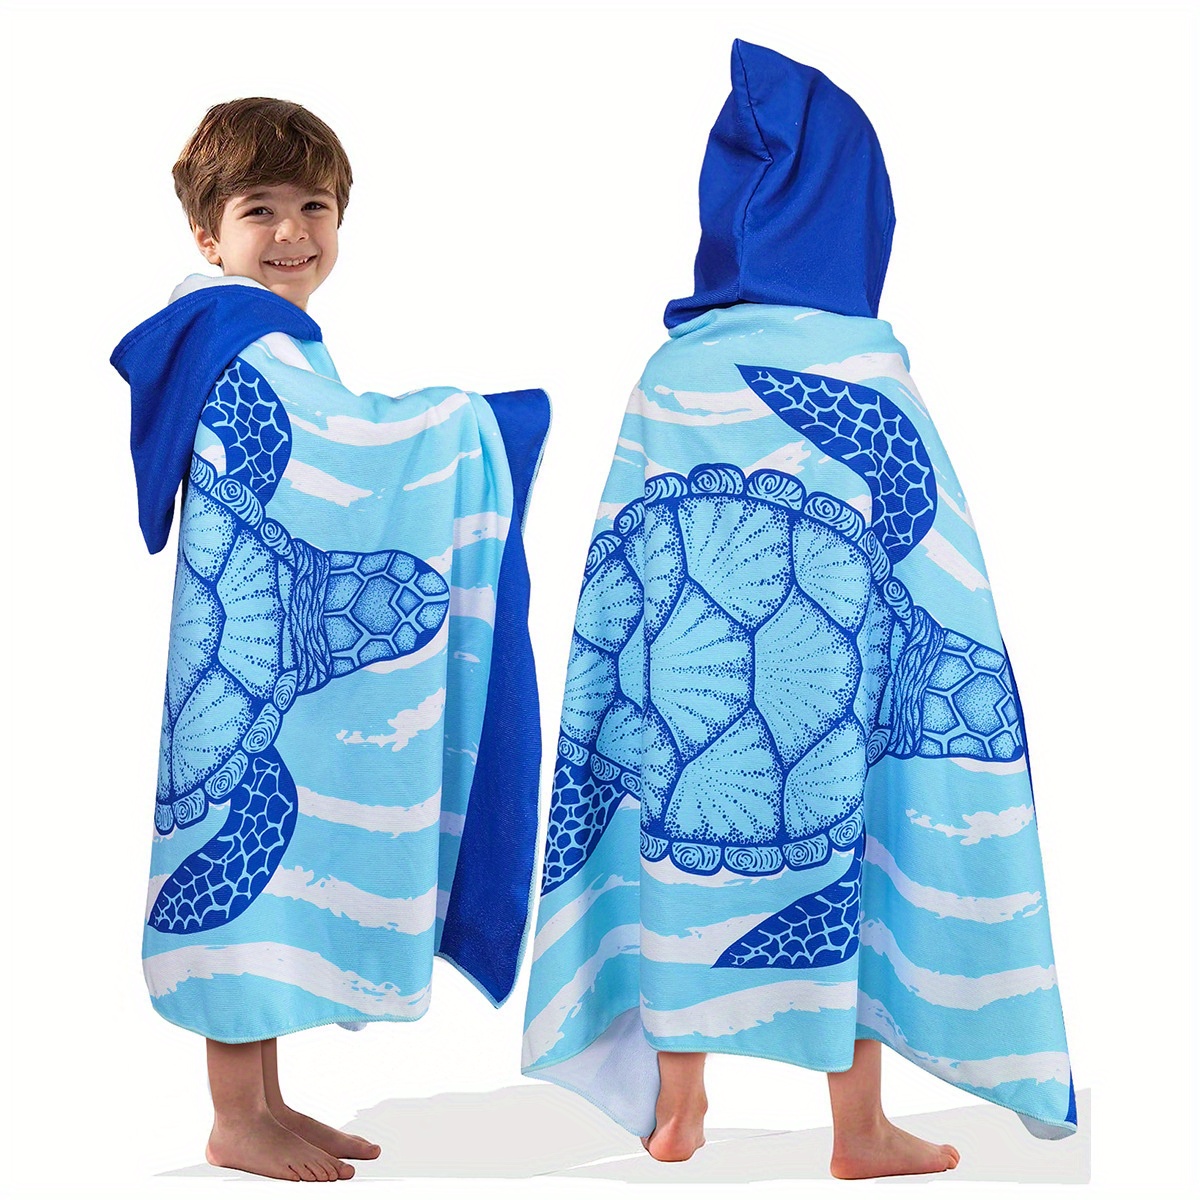 

Kids Hooded Bath Towel Cape, Microfiber Ultra-fine 240gsm Knitted Fabric, Wearable Cartoon Turtle Design, Modern Style For Children Ages 3-14 - Soft Absorbent Poncho Robe For Swimming & Bathing